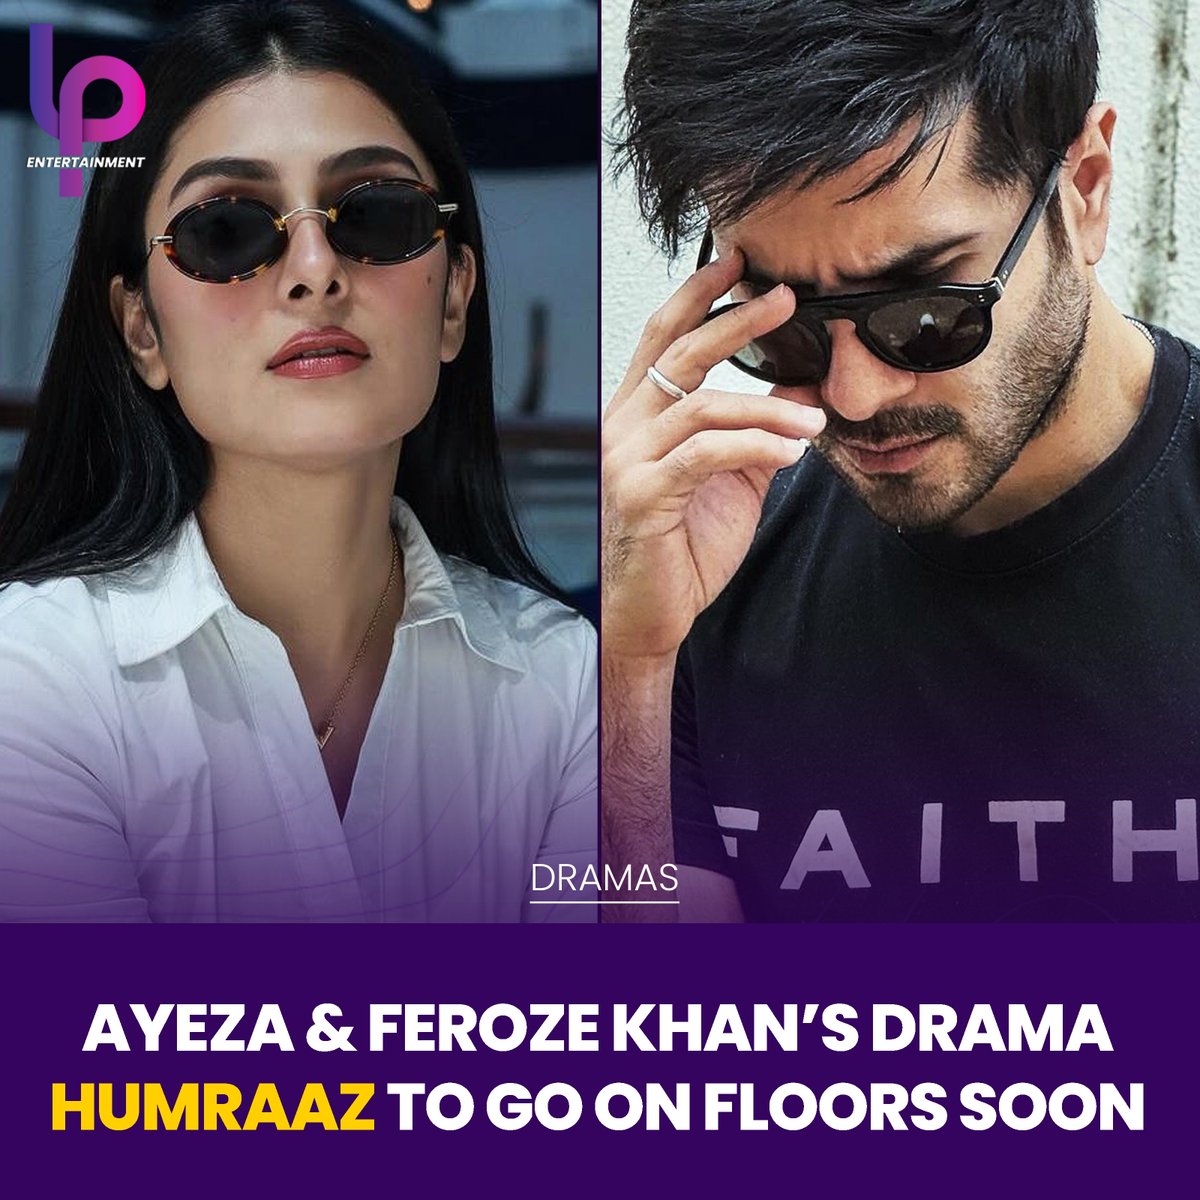 Mega drama serial 'Humraaz' is expected to go on floor soon as the developments are underway regarding shoot and casting. We can expect a massive craze about this drama as both the lead stars are two Super Khans, Ayeza Khan and Feroze Khan. 🙌❤ #FerozeKhan #AyezaKhan